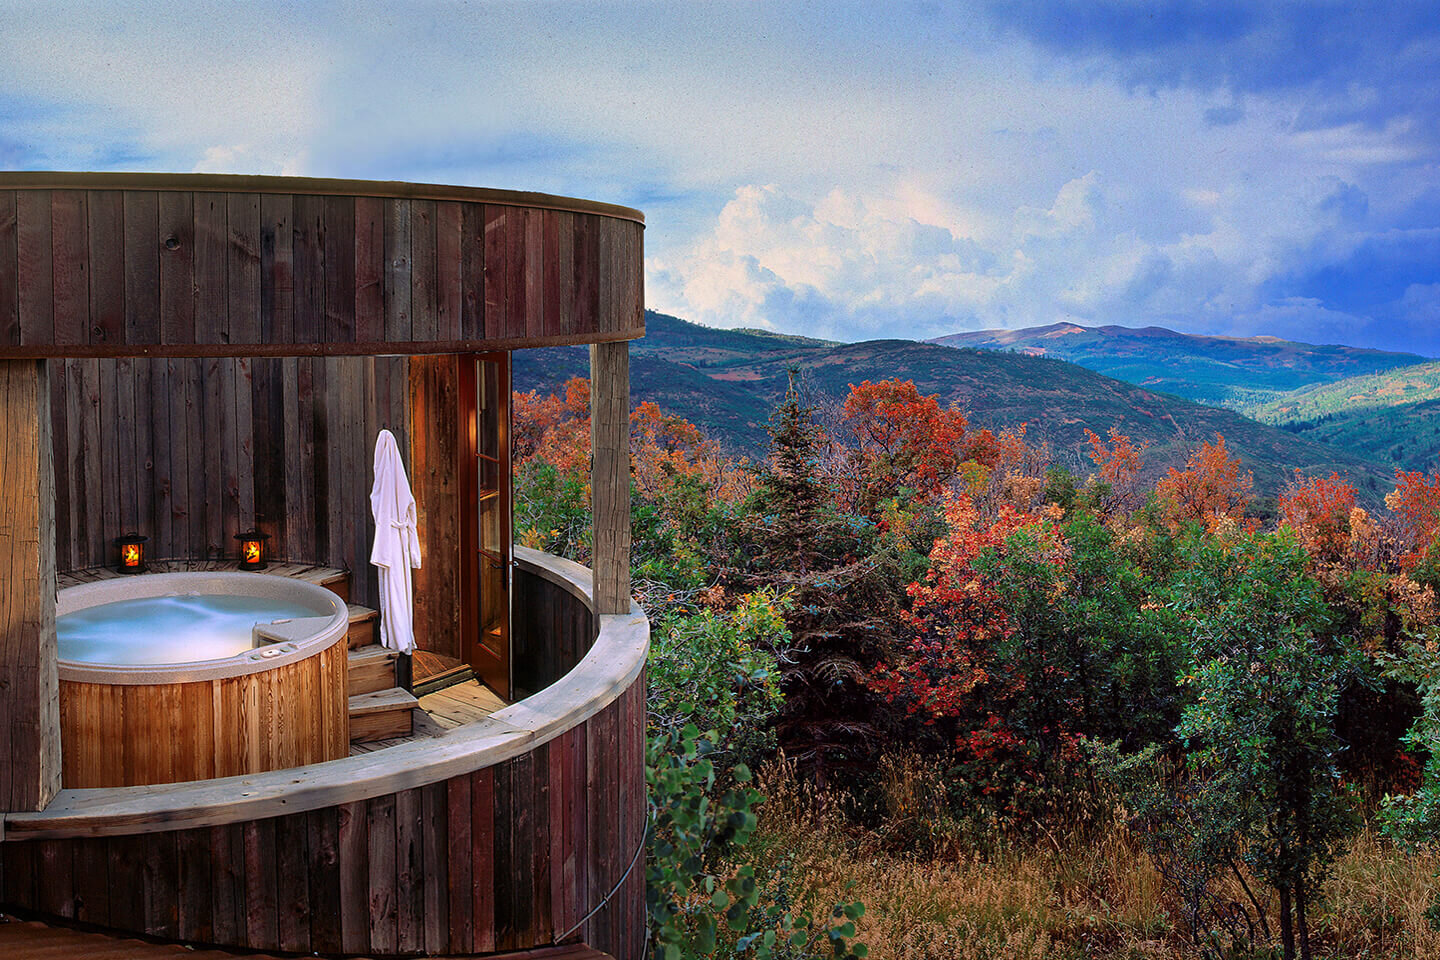 Round jacuzzi with a view toward distant hills